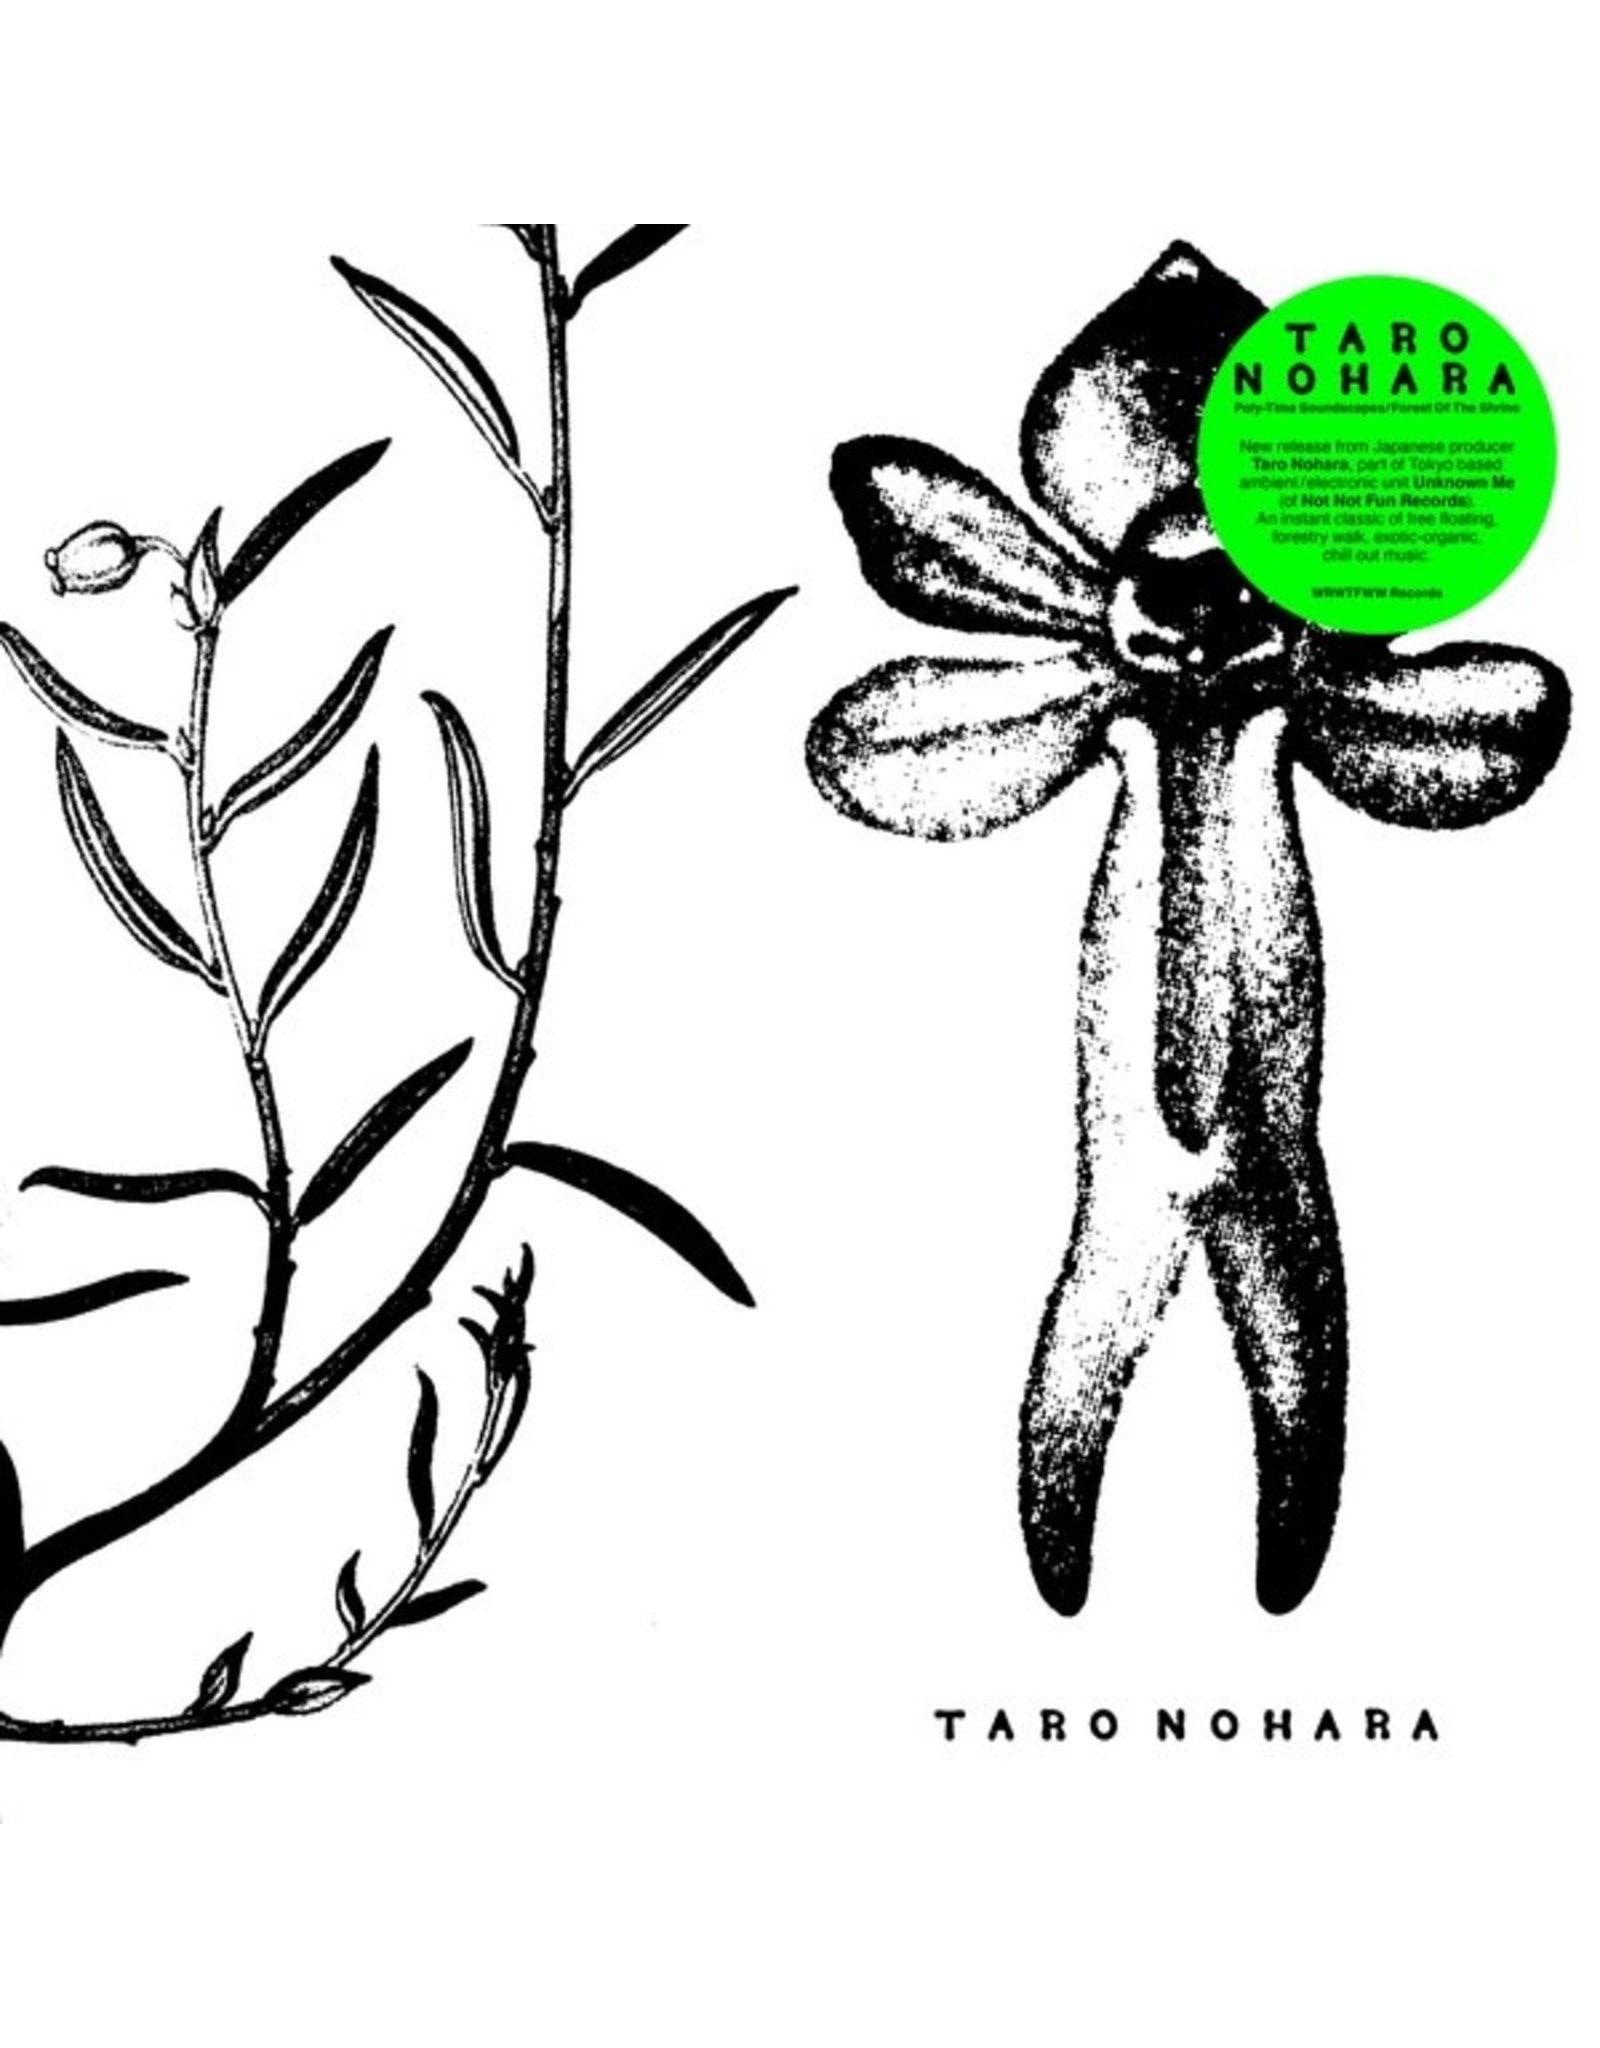 WRWTFWW Nohara, Taro: Poly-Time Soundscapes / Forest of the Shrine LP